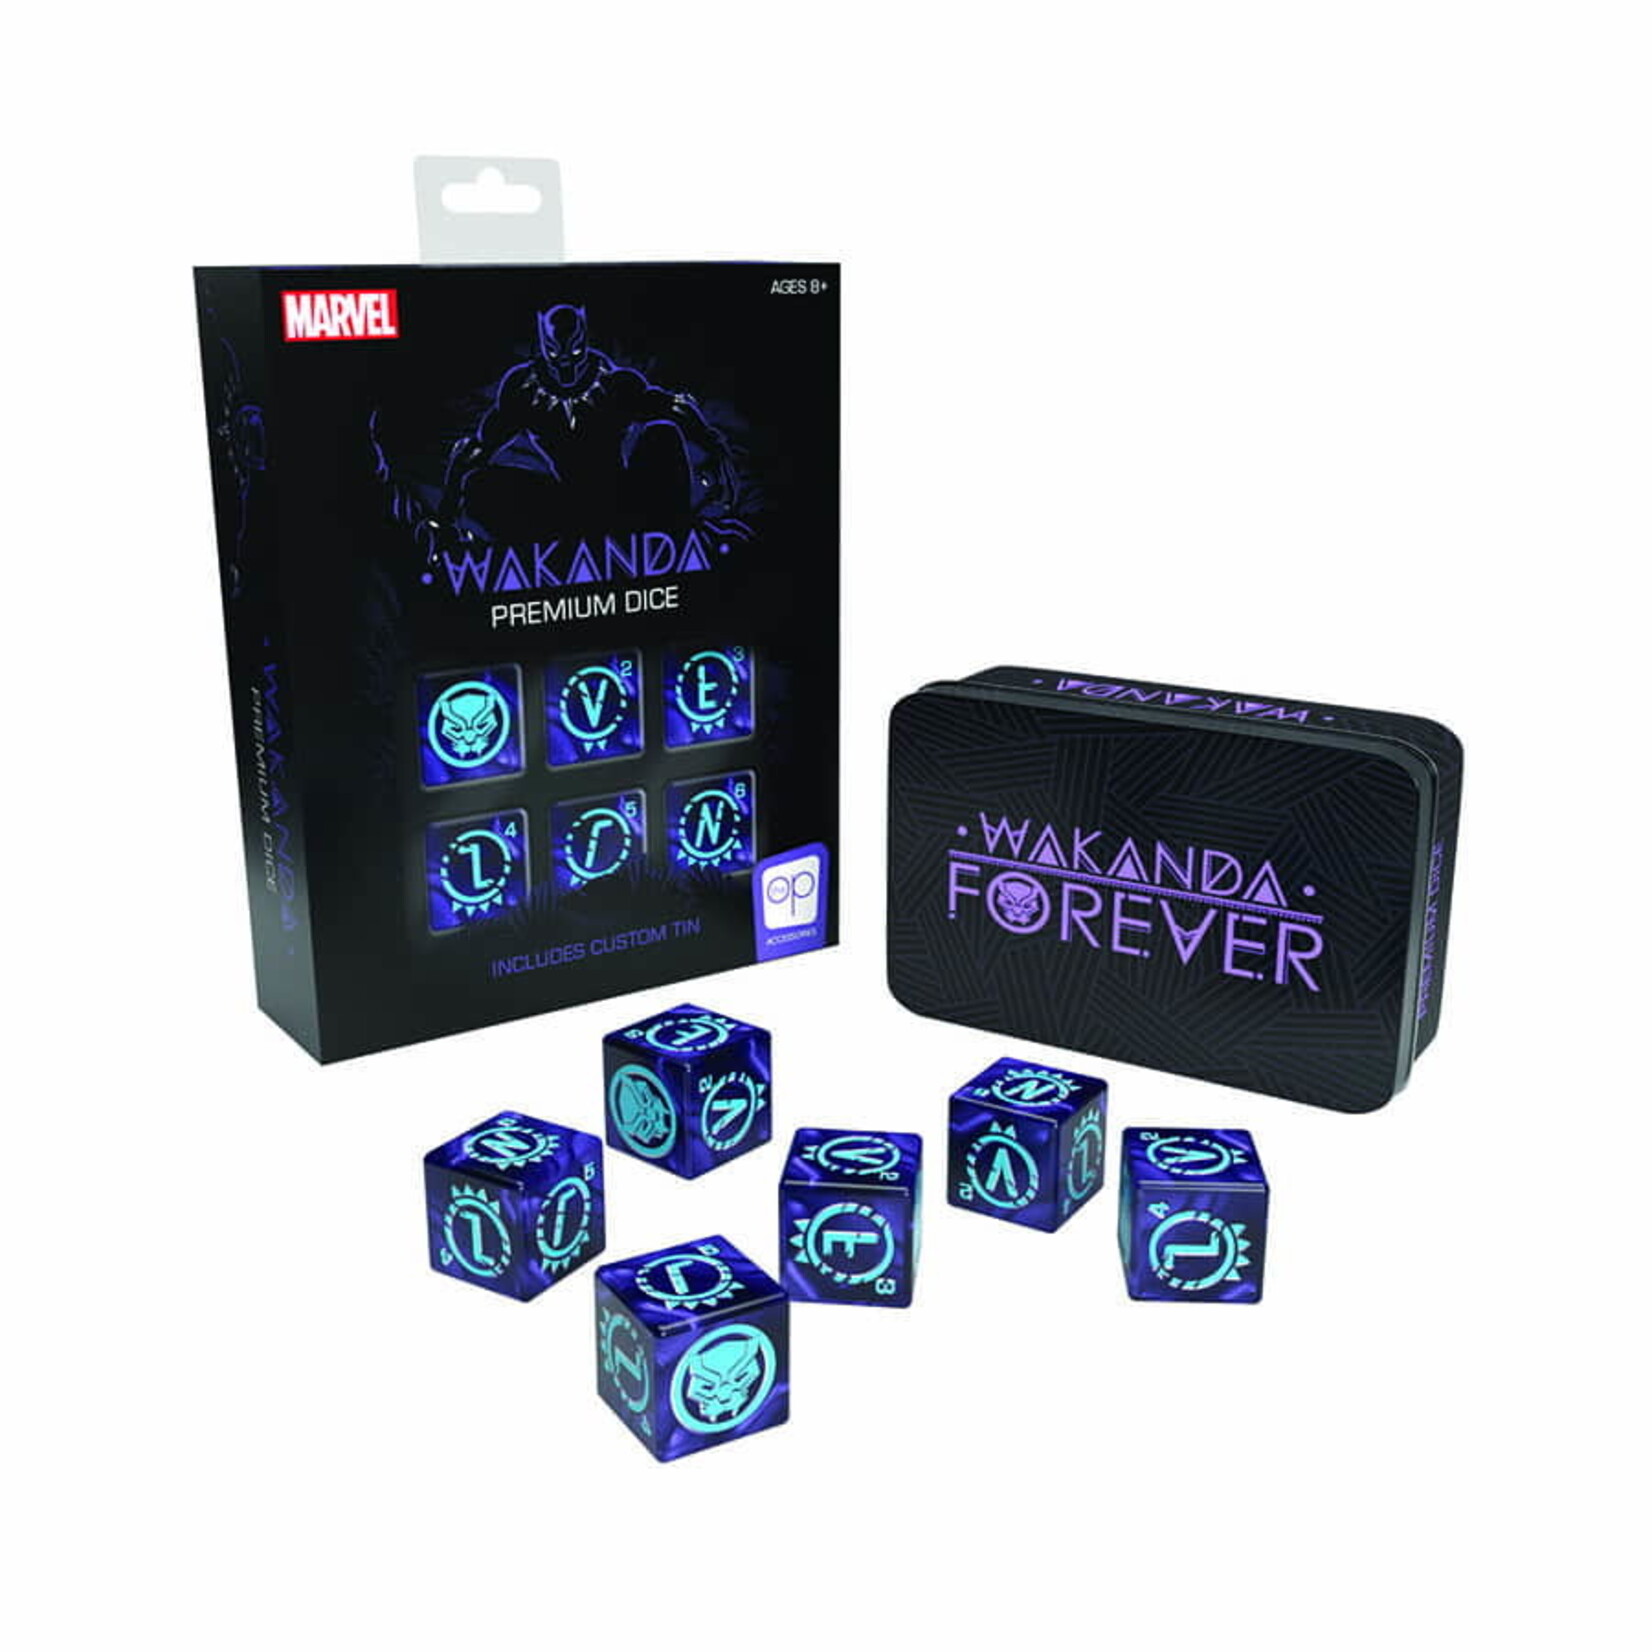 USAOPOLY Marvel Wakanda Forever D6 Dice (6) Set (need barcode)